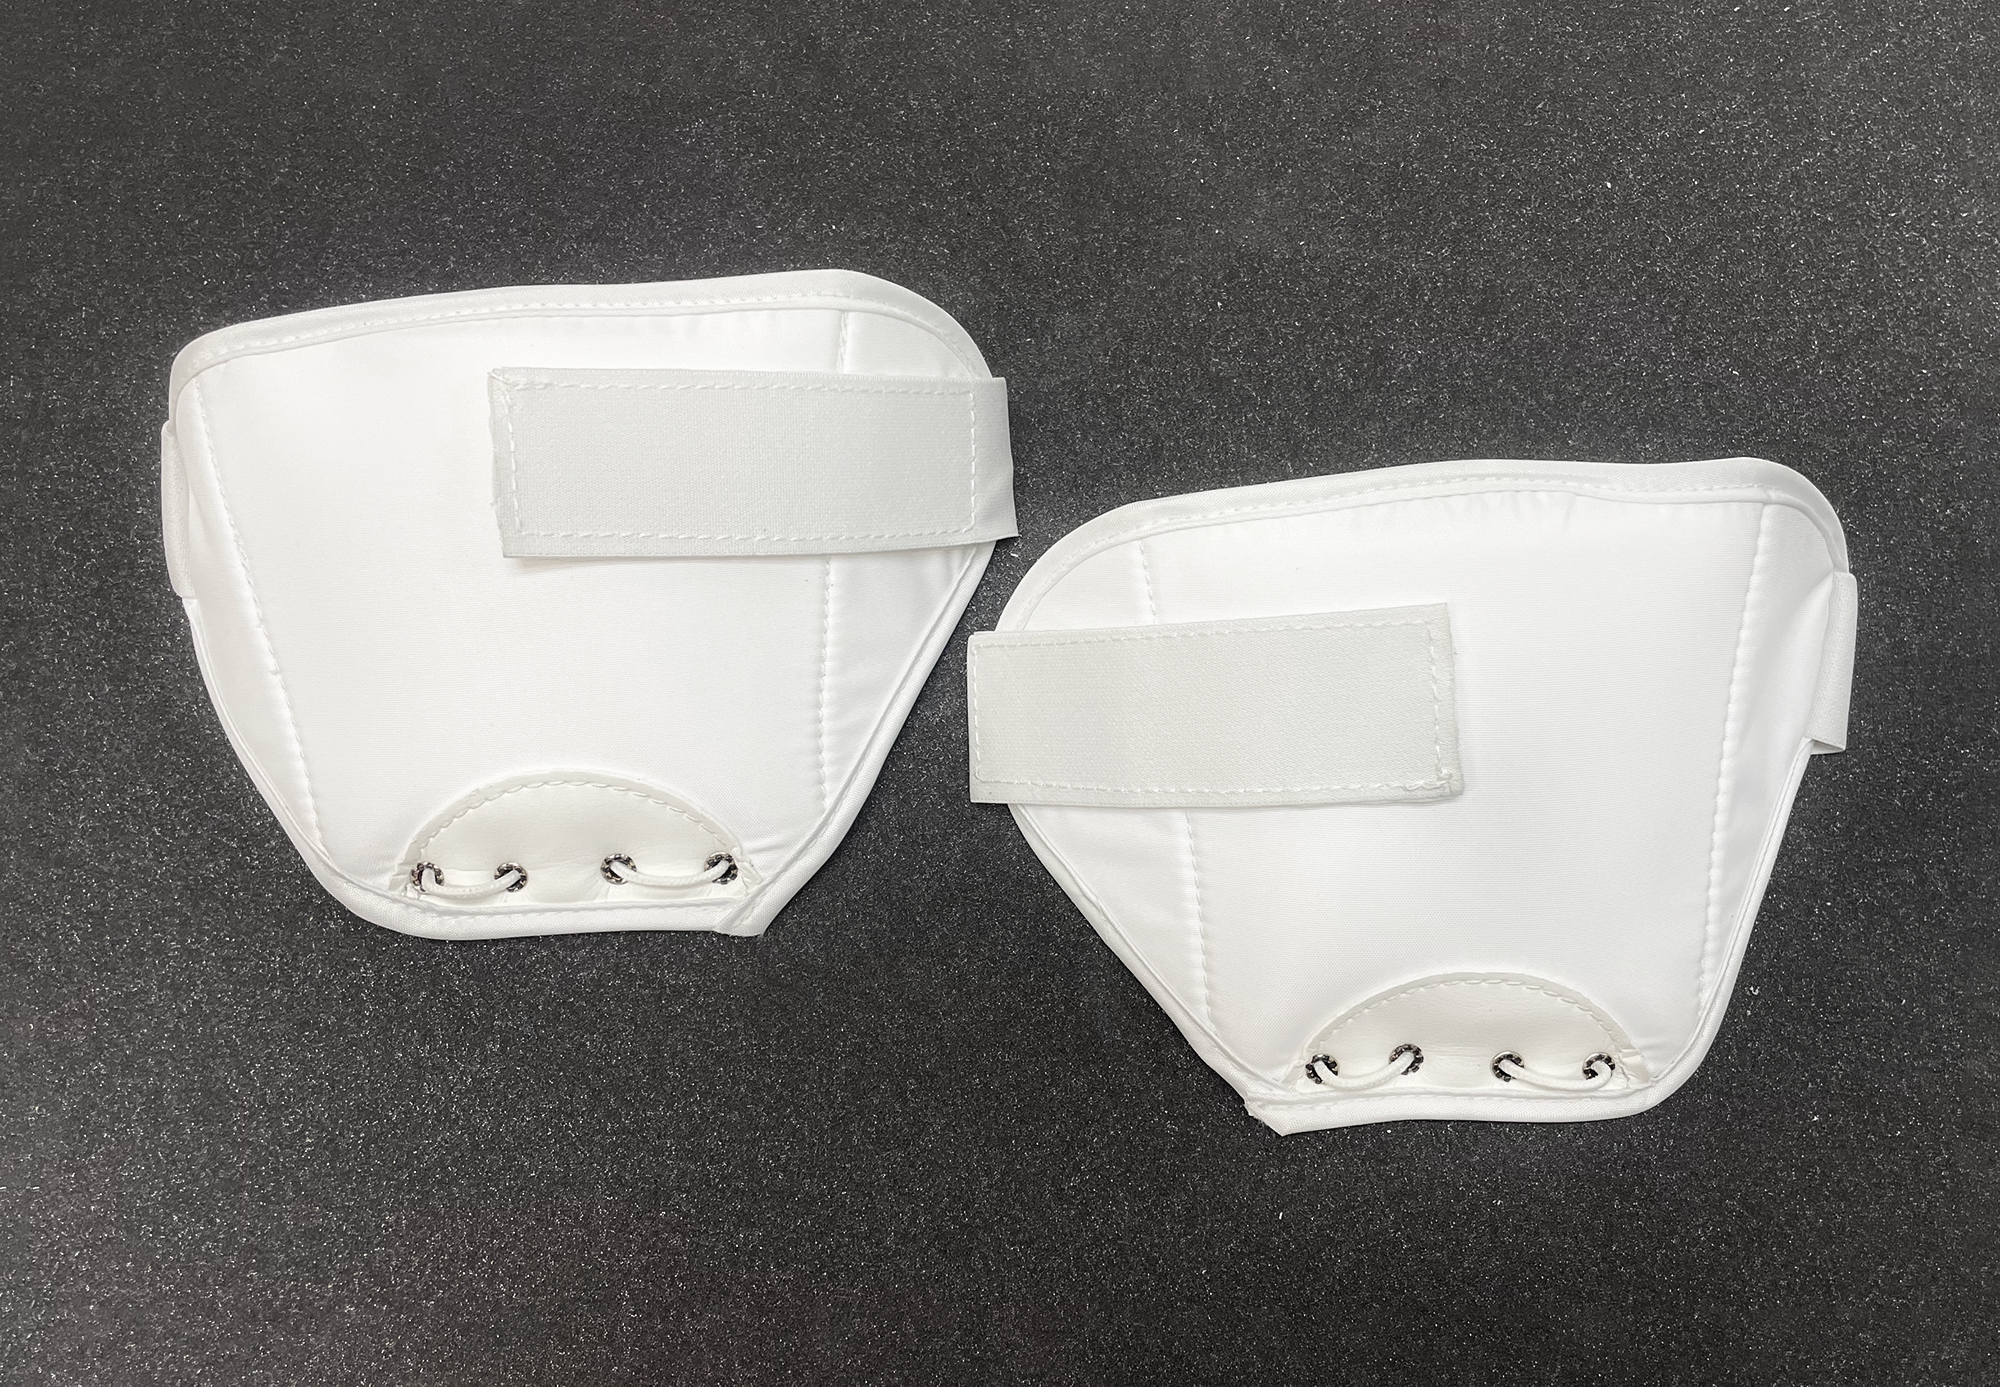 Top of two white thigh guards